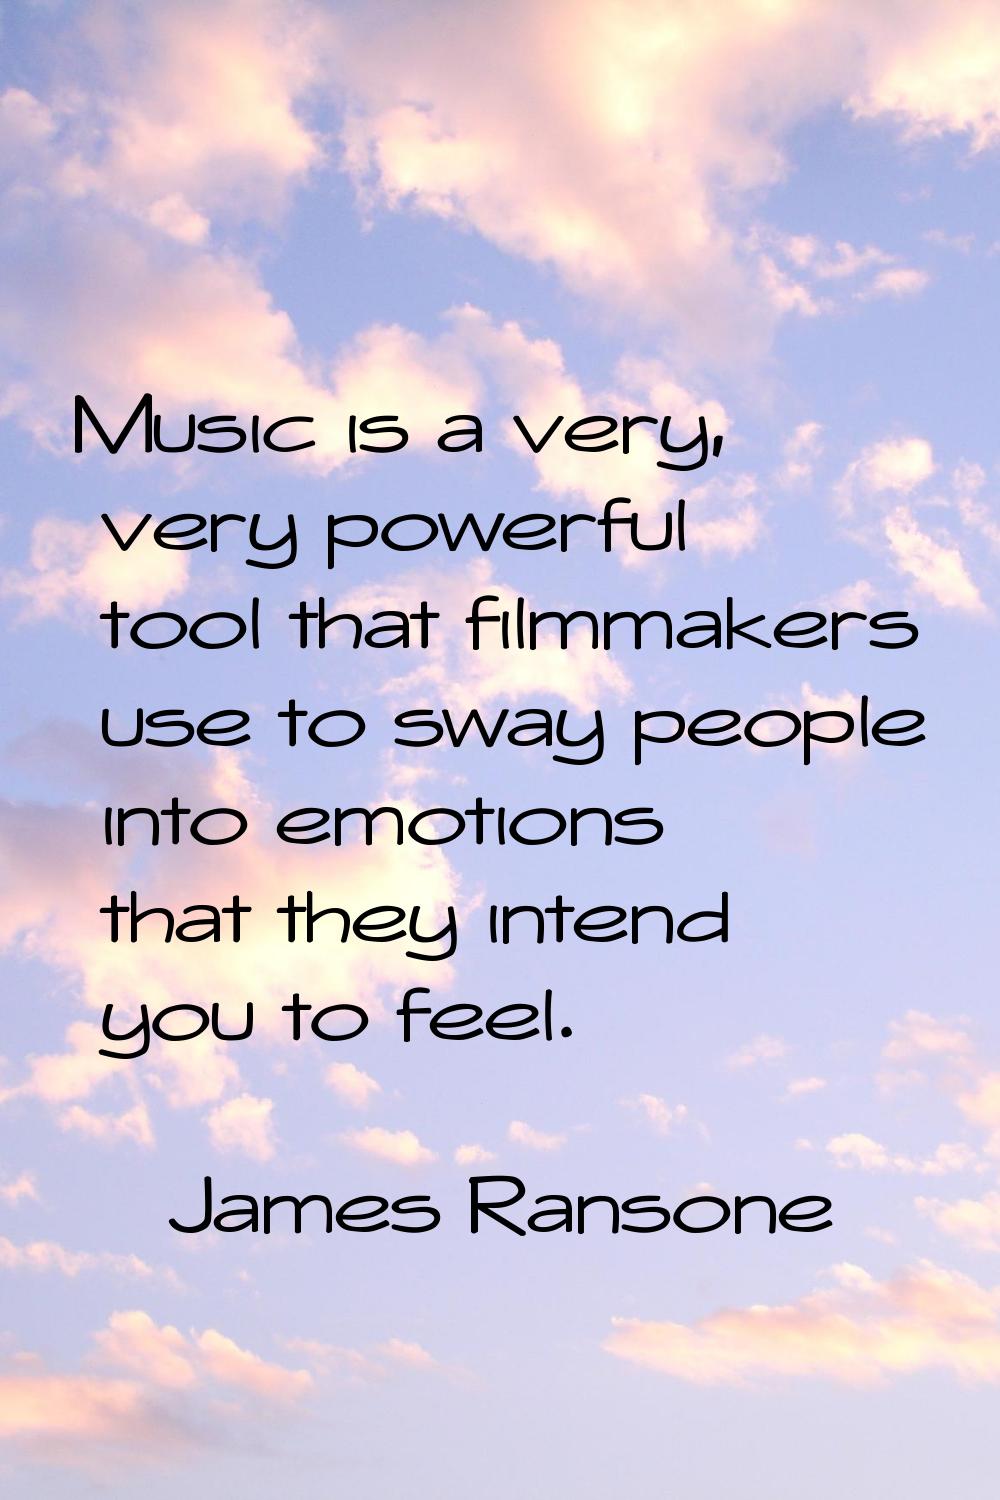 Music is a very, very powerful tool that filmmakers use to sway people into emotions that they inte